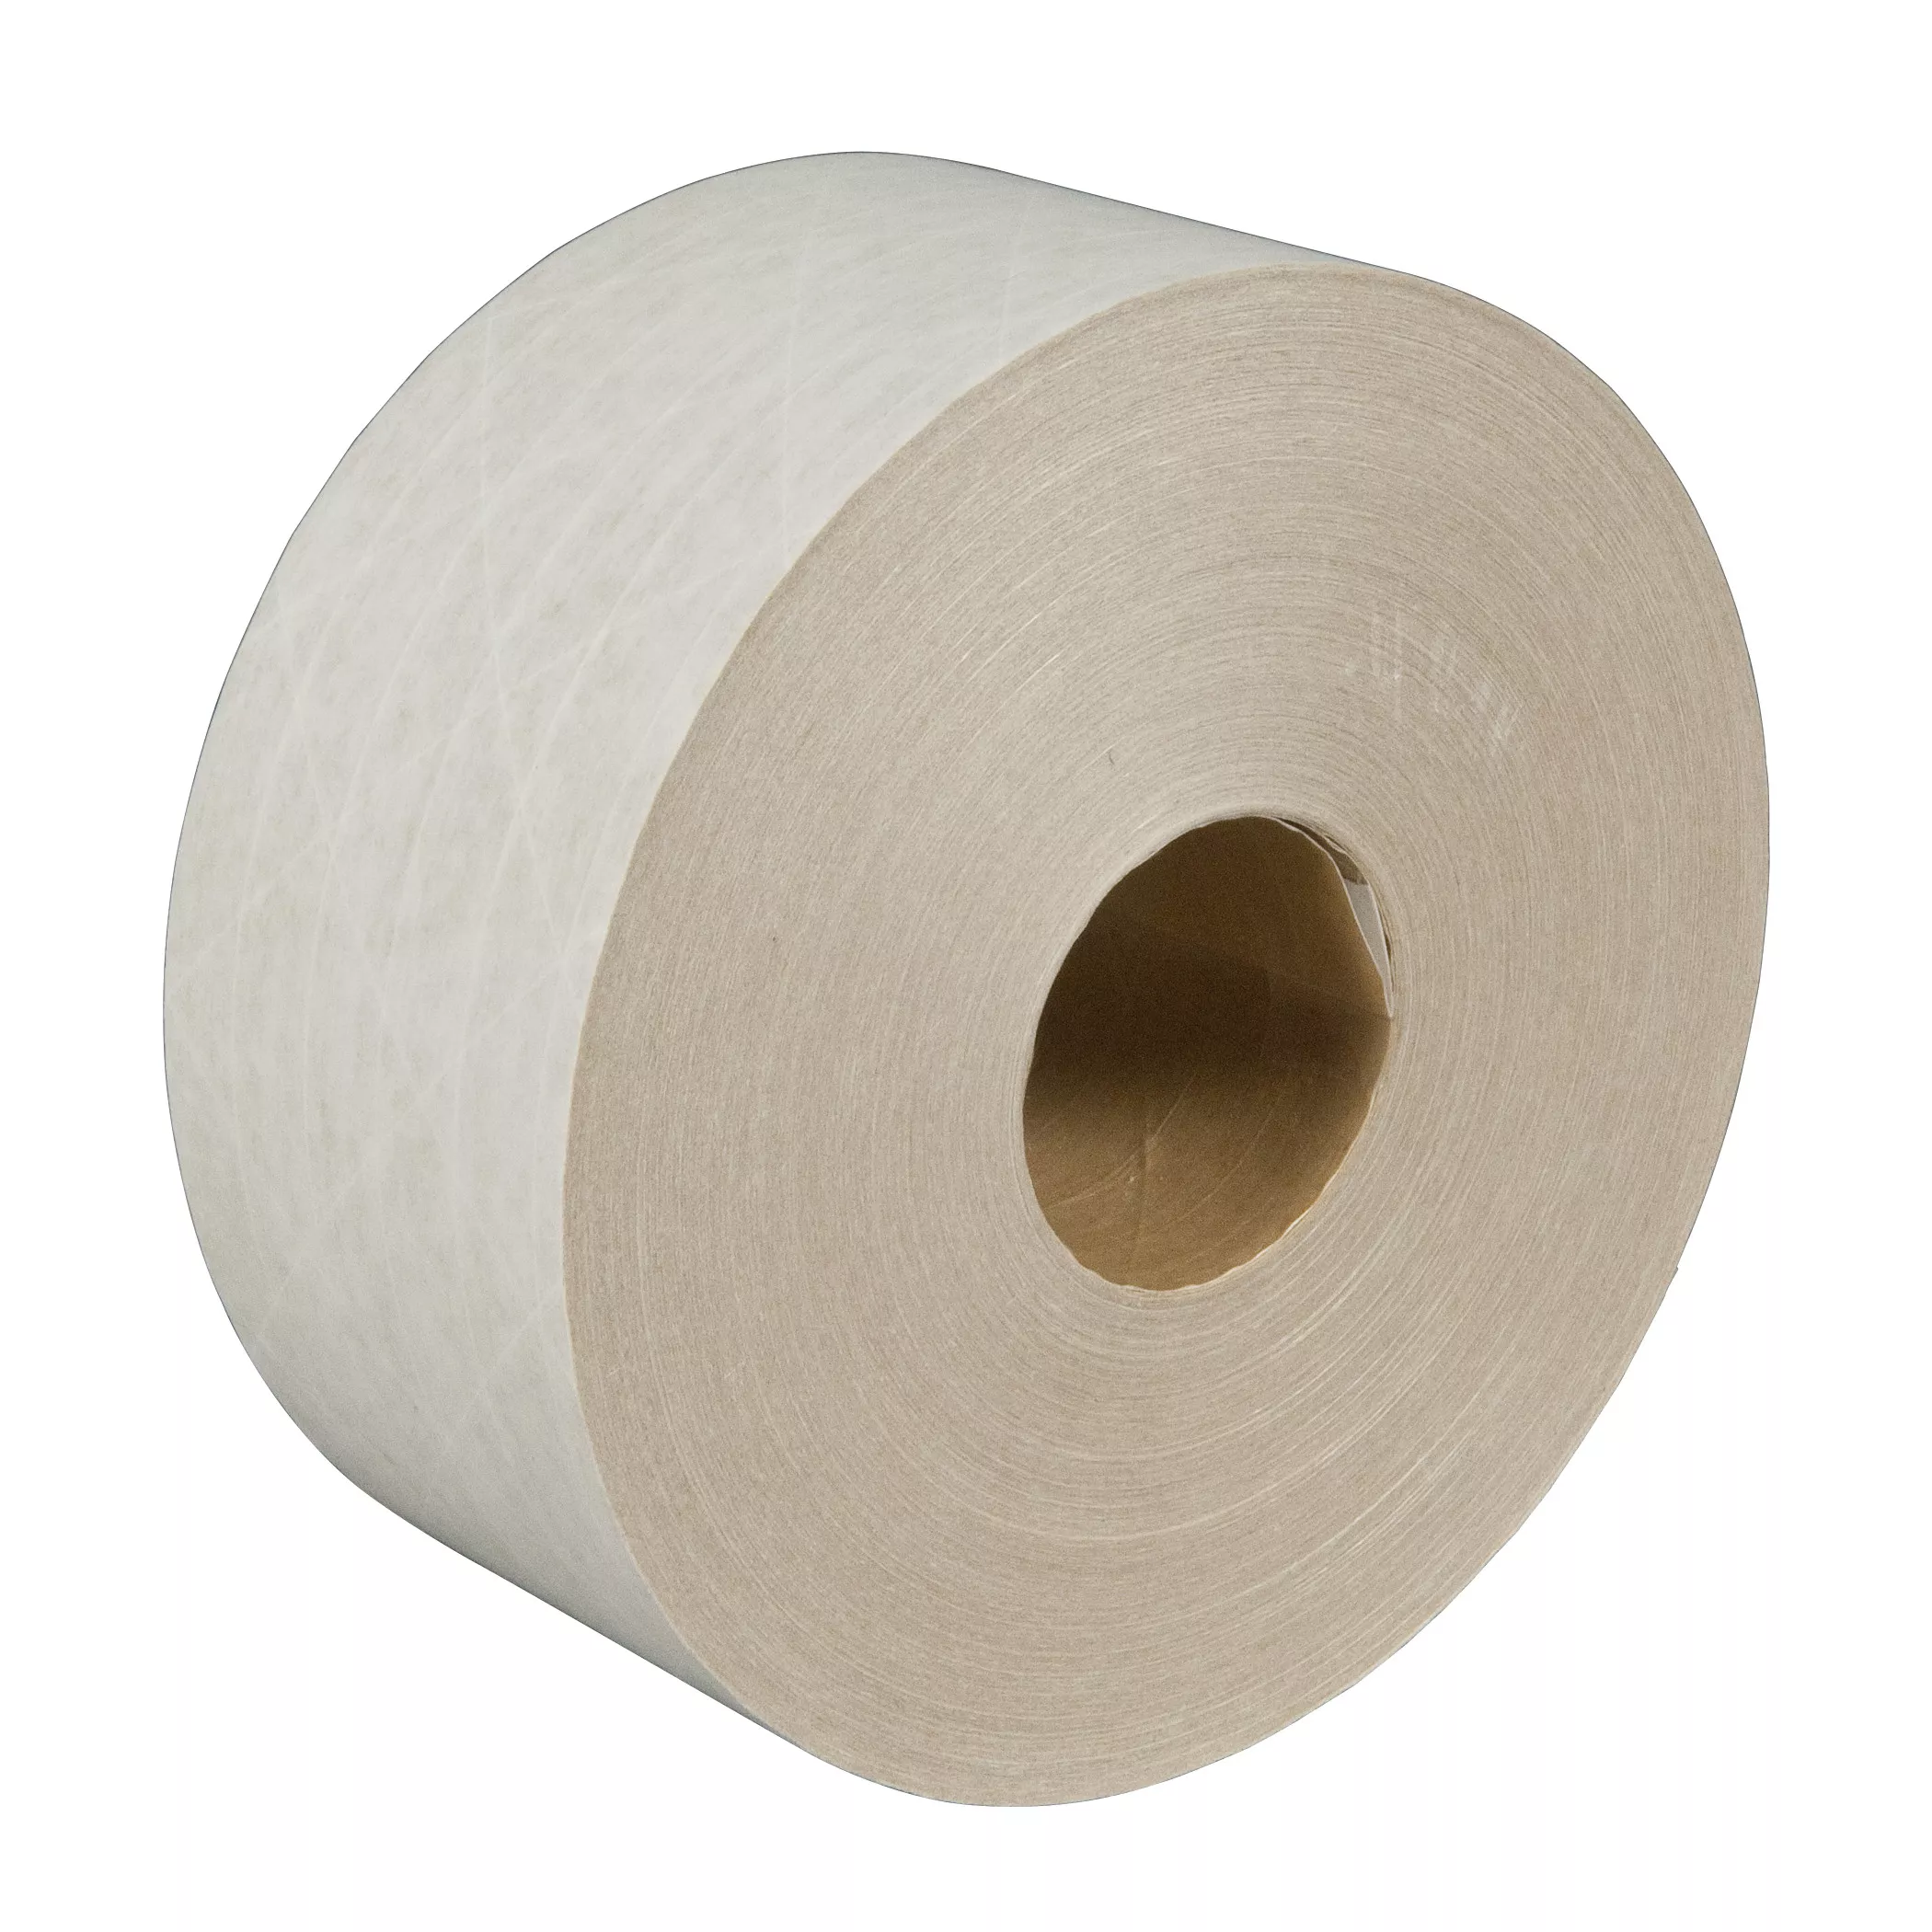 3M™ Water Activated Paper Tape 6146, White, Medium Duty Reinforced, 72
mm x 450 ft, 10/Case